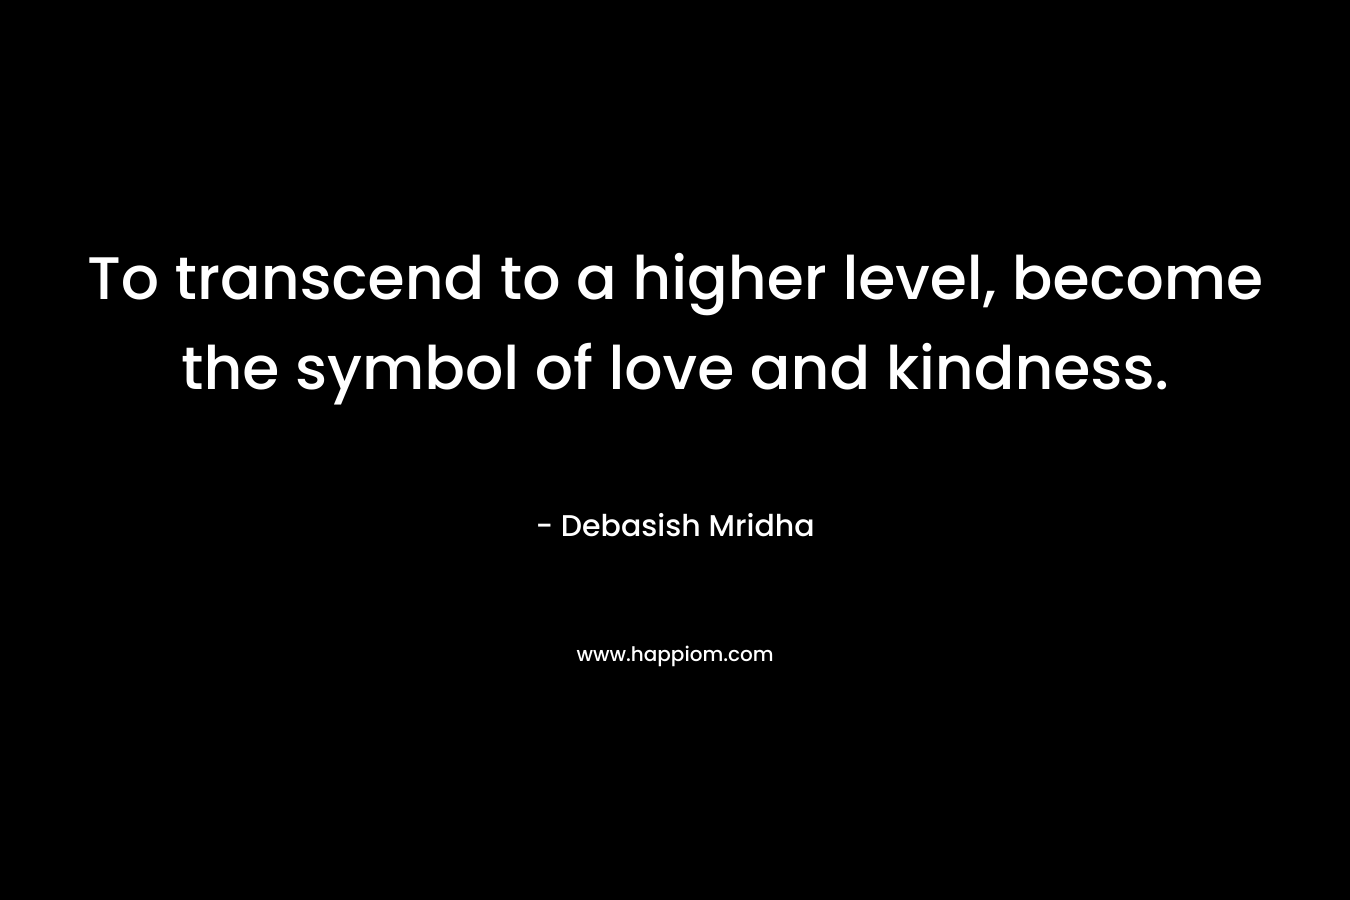 To transcend to a higher level, become the symbol of love and kindness.